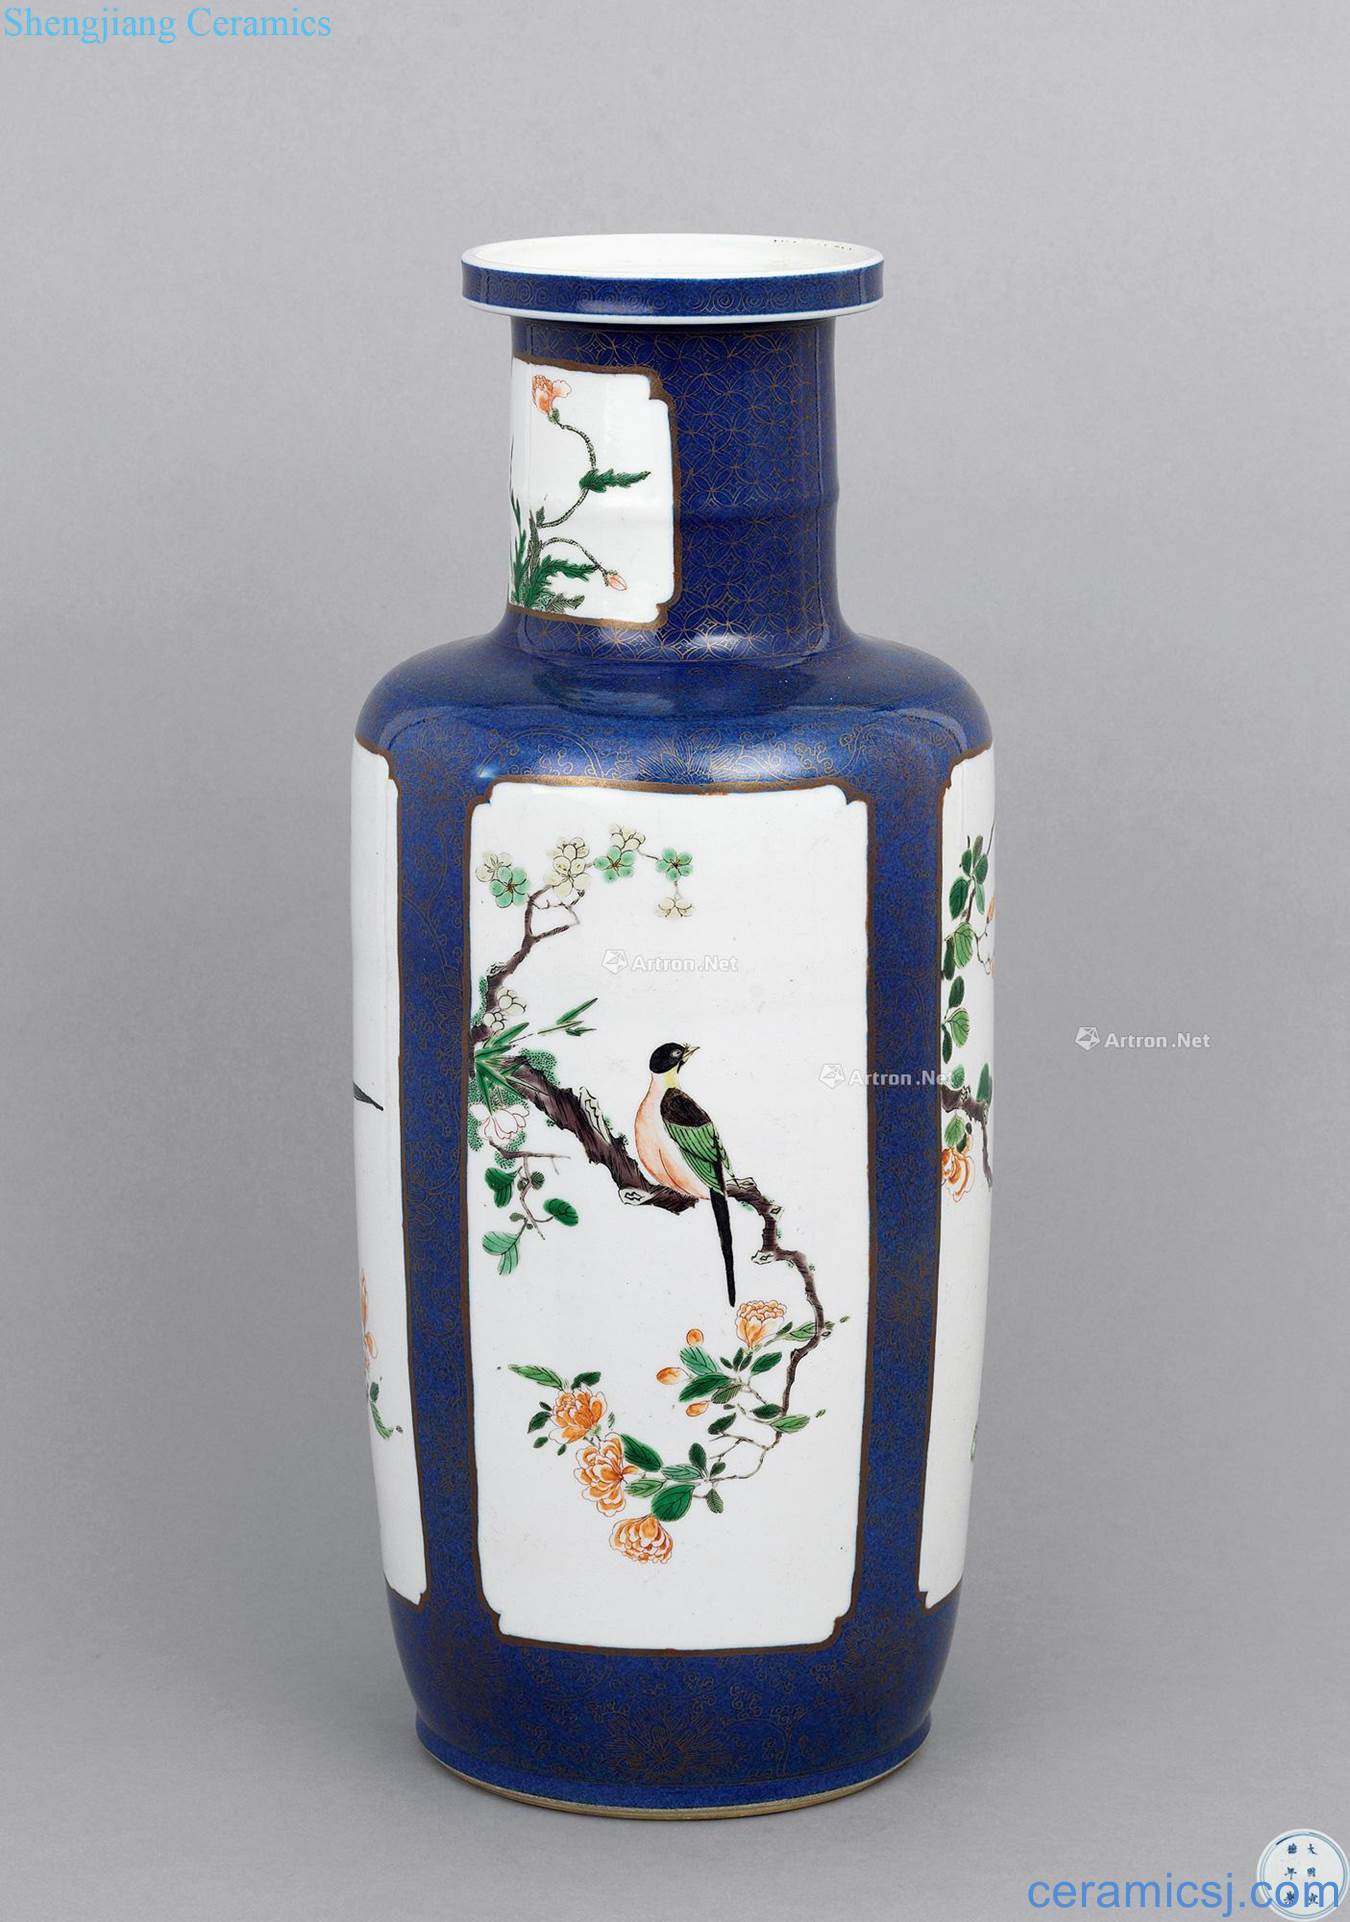 The qing emperor kangxi is aspersed to the colour blue medallion colorful flowers and birds were bottles